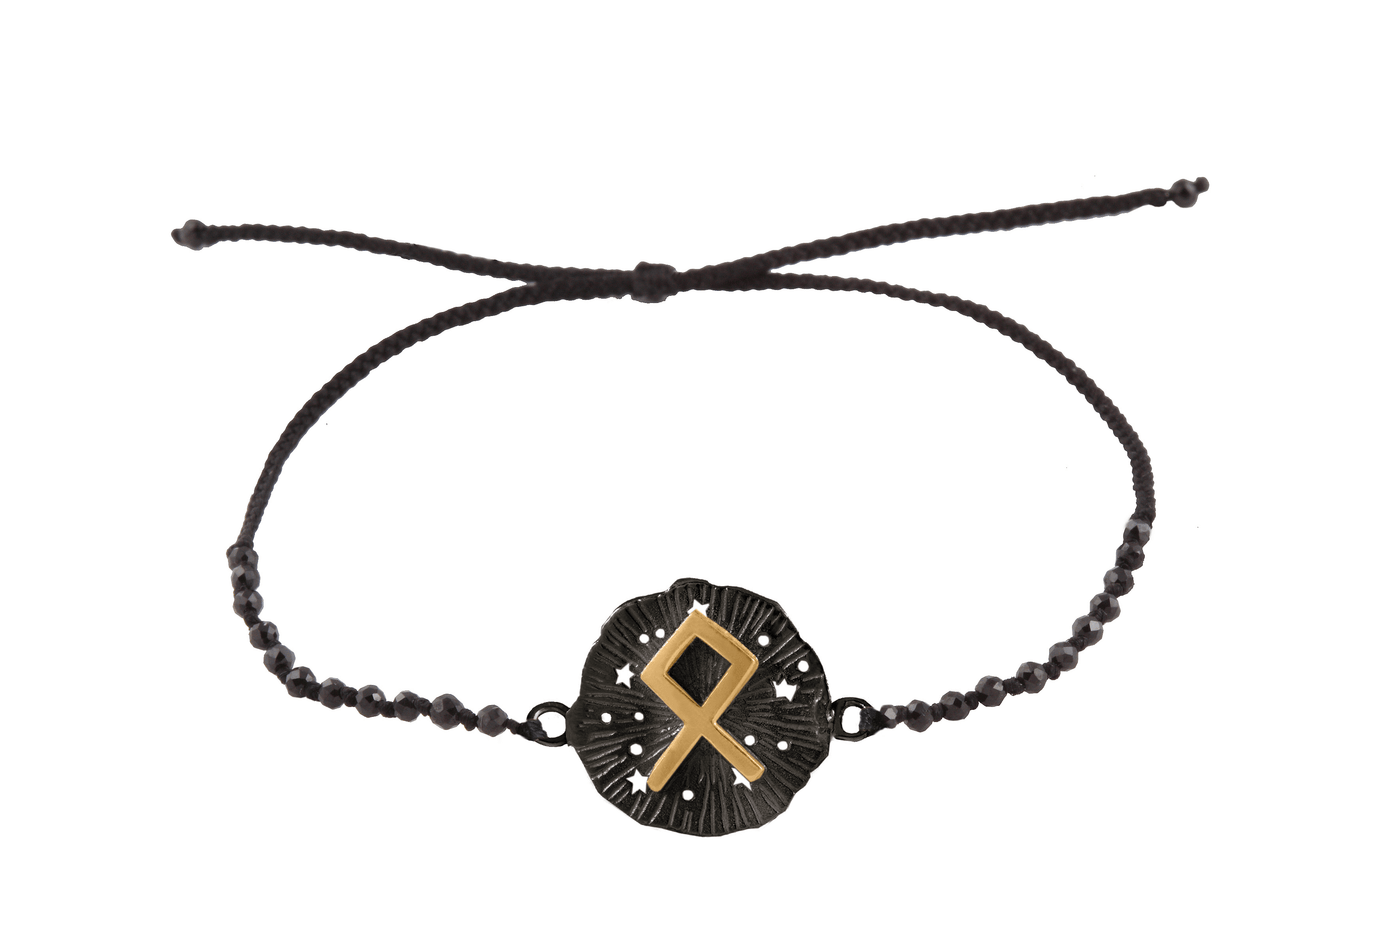 Runic medallion amulet Odal bracelet with beads. Gold plated and oxide